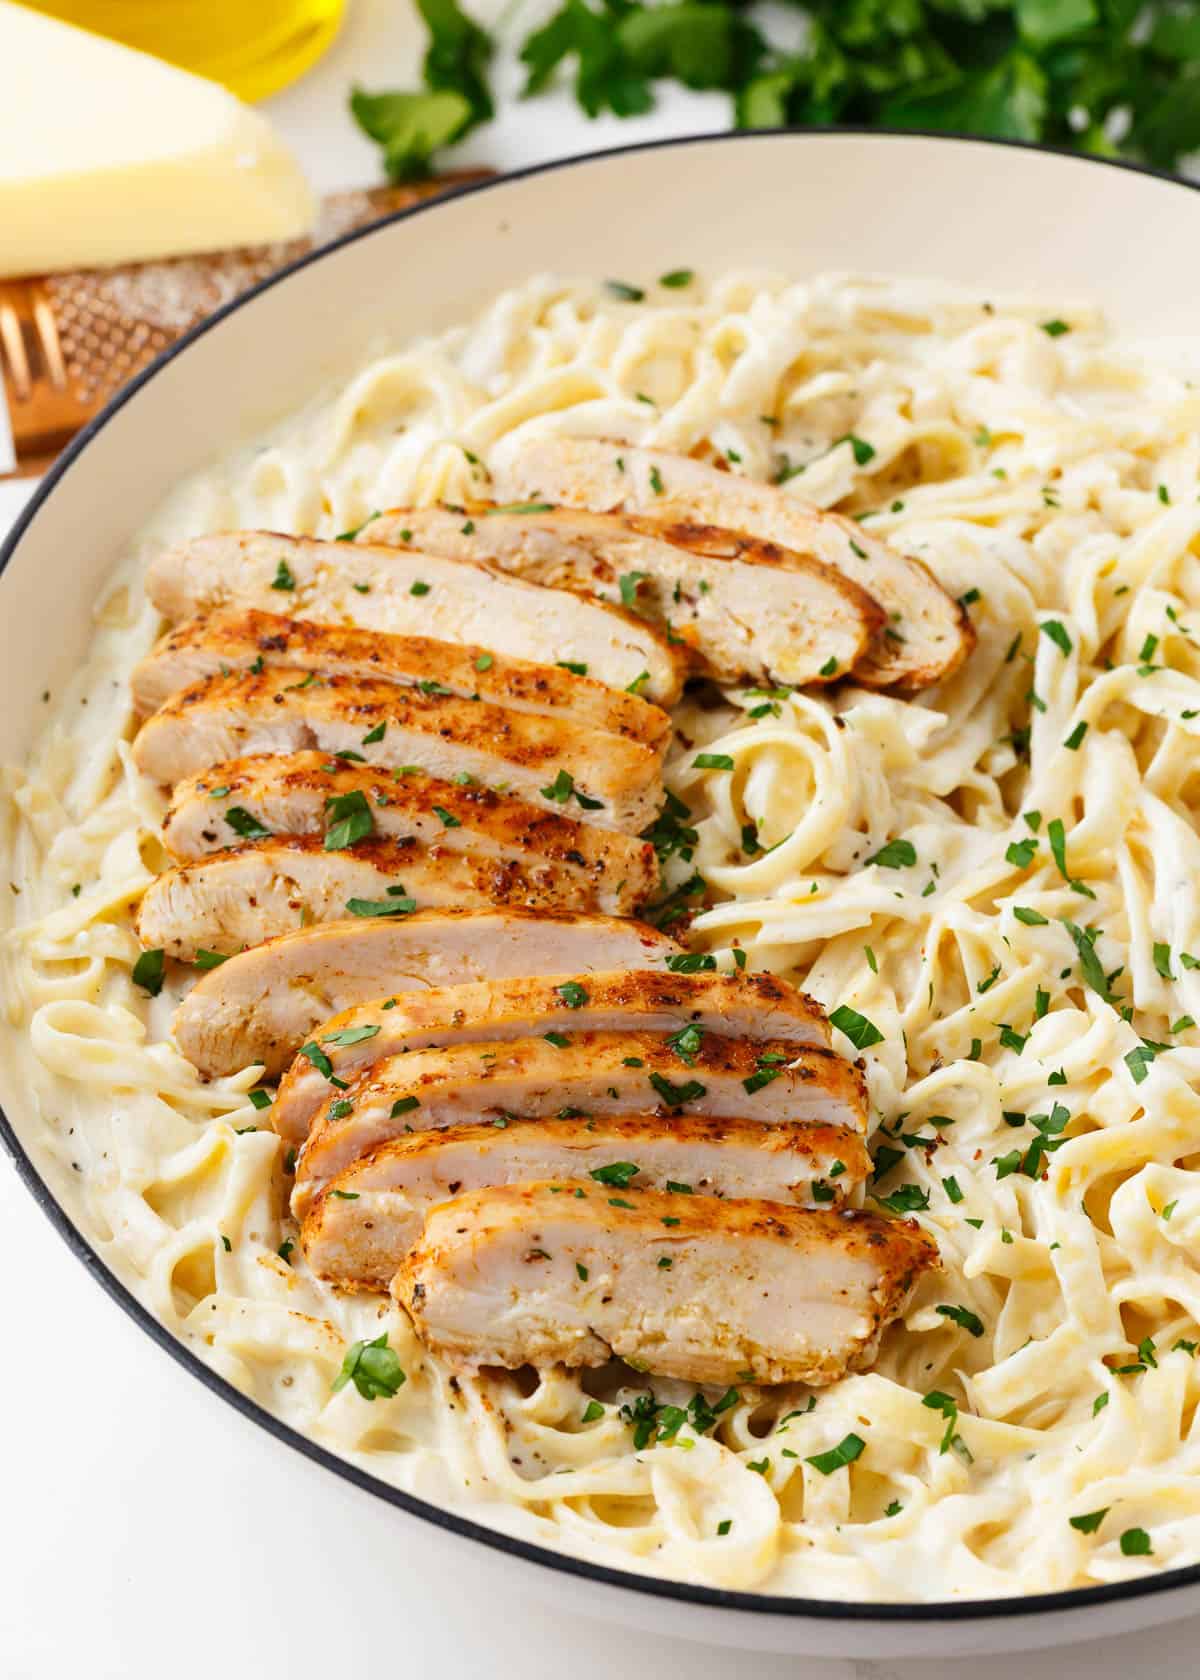 Chicken alfredo in a bowl with fettuccini noodles.